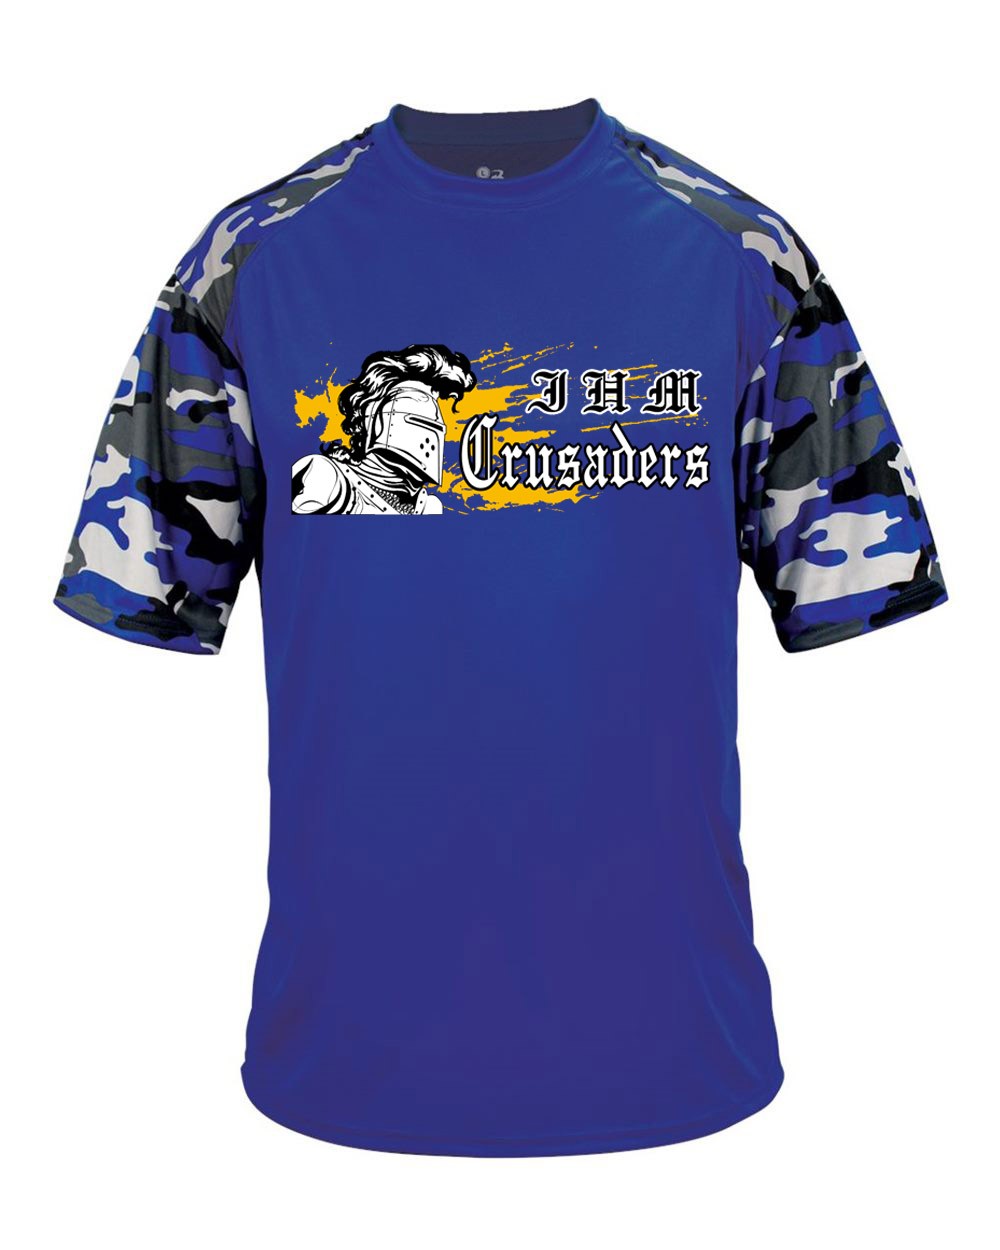 IHM Spirit S/S Camo T-Shirt w/ Crusader Logo - Please Allow 2-3 Weeks for Delivery